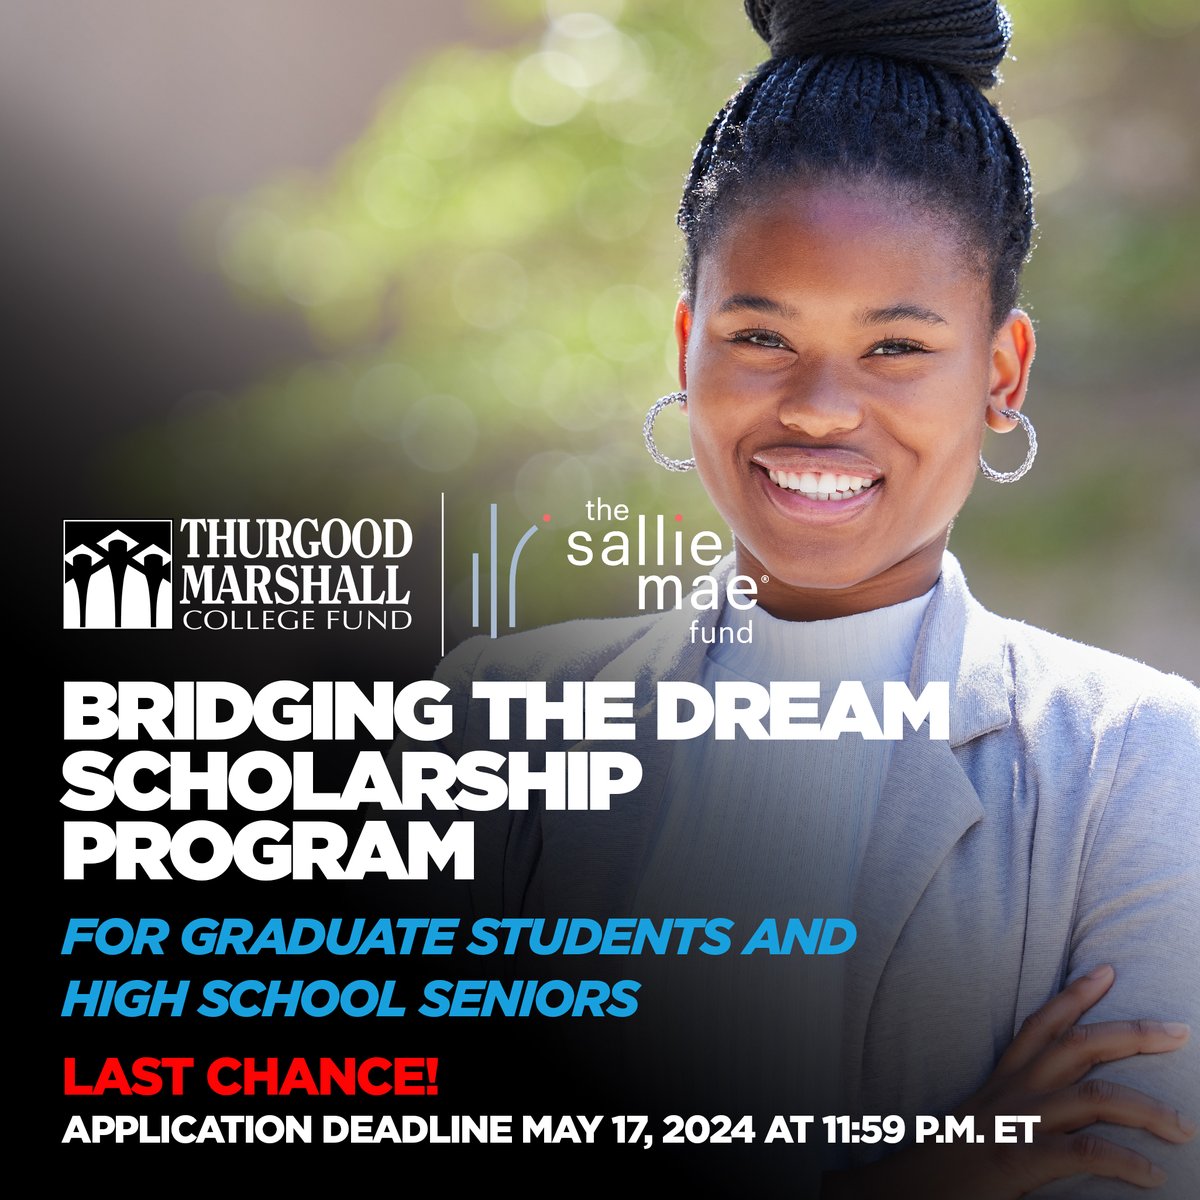 Closing soon! Friday at 11:59 p.m. ET is the last chance to apply for Bridging the Dream Scholarships for the 2024-2025 academic year. The @SallieMae Fund, in partnership with @tmcf_hbcu, is offering up to $10,000 to graduate students and high school seniors.